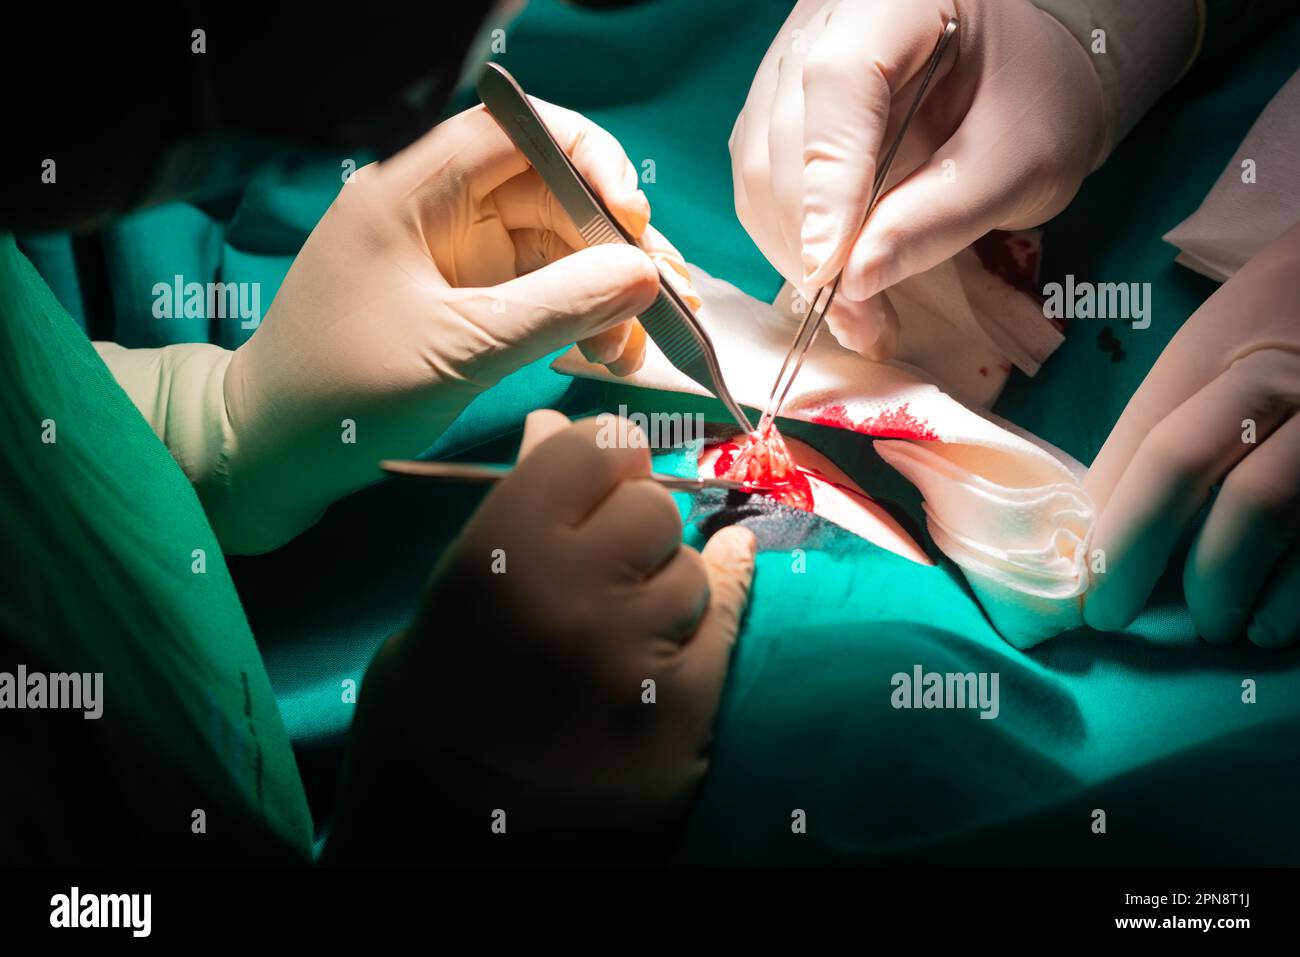 Close-up of the hands of a surgeon operating on a dermatological lesion, a fibroid. Resection with scalpel, forceps and sterile gloves on a green ster Stock Photo